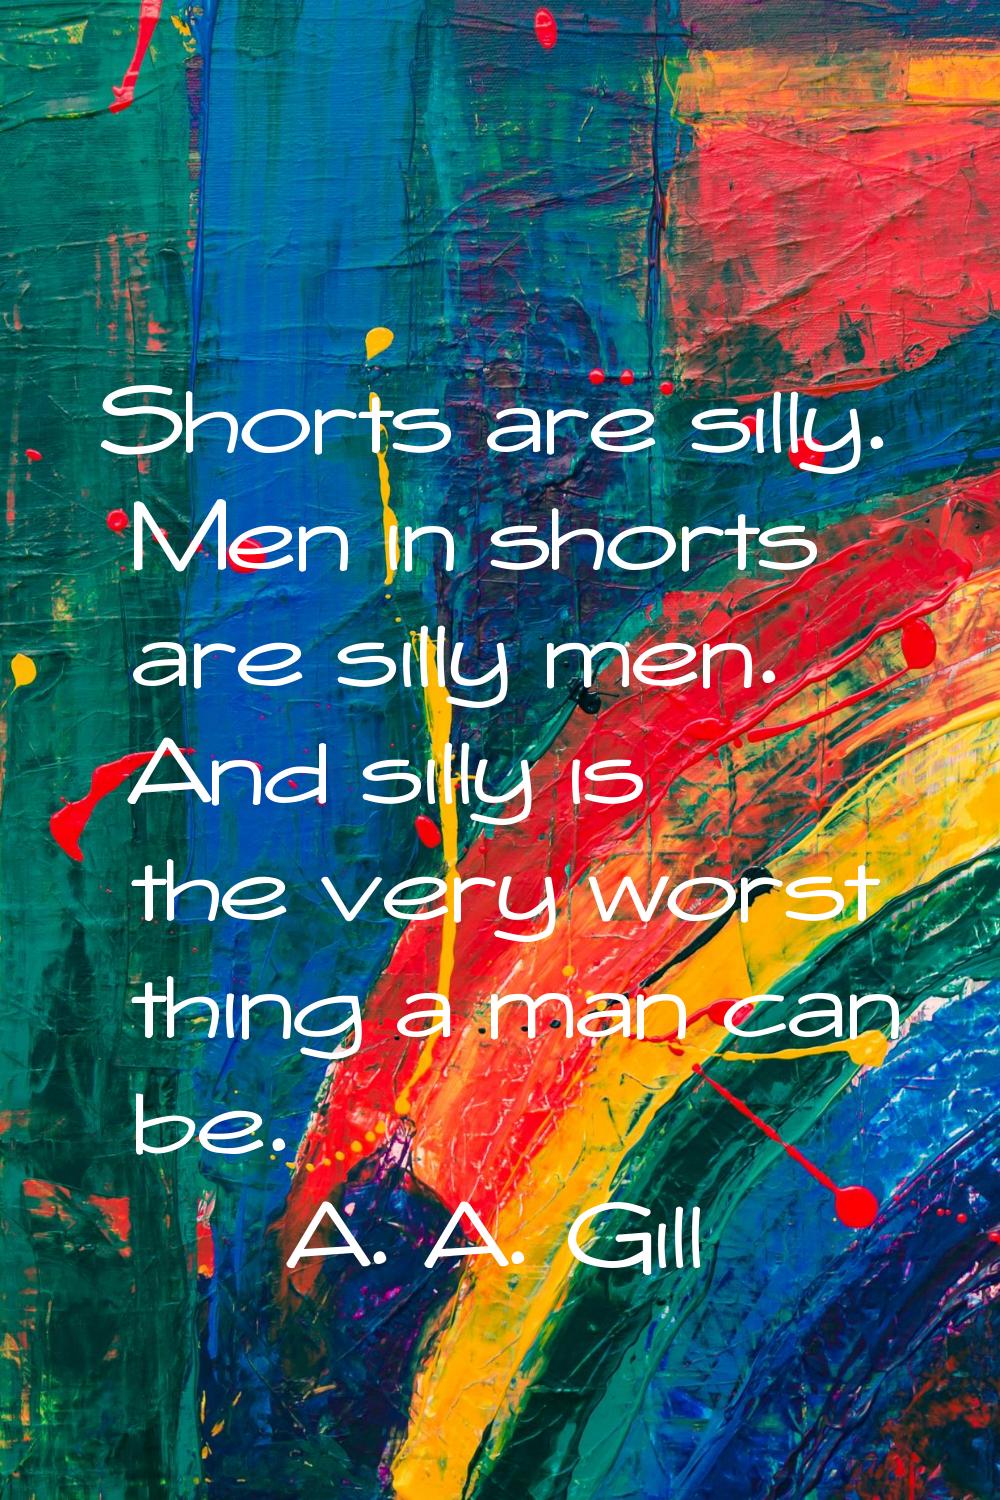 Shorts are silly. Men in shorts are silly men. And silly is the very worst thing a man can be.